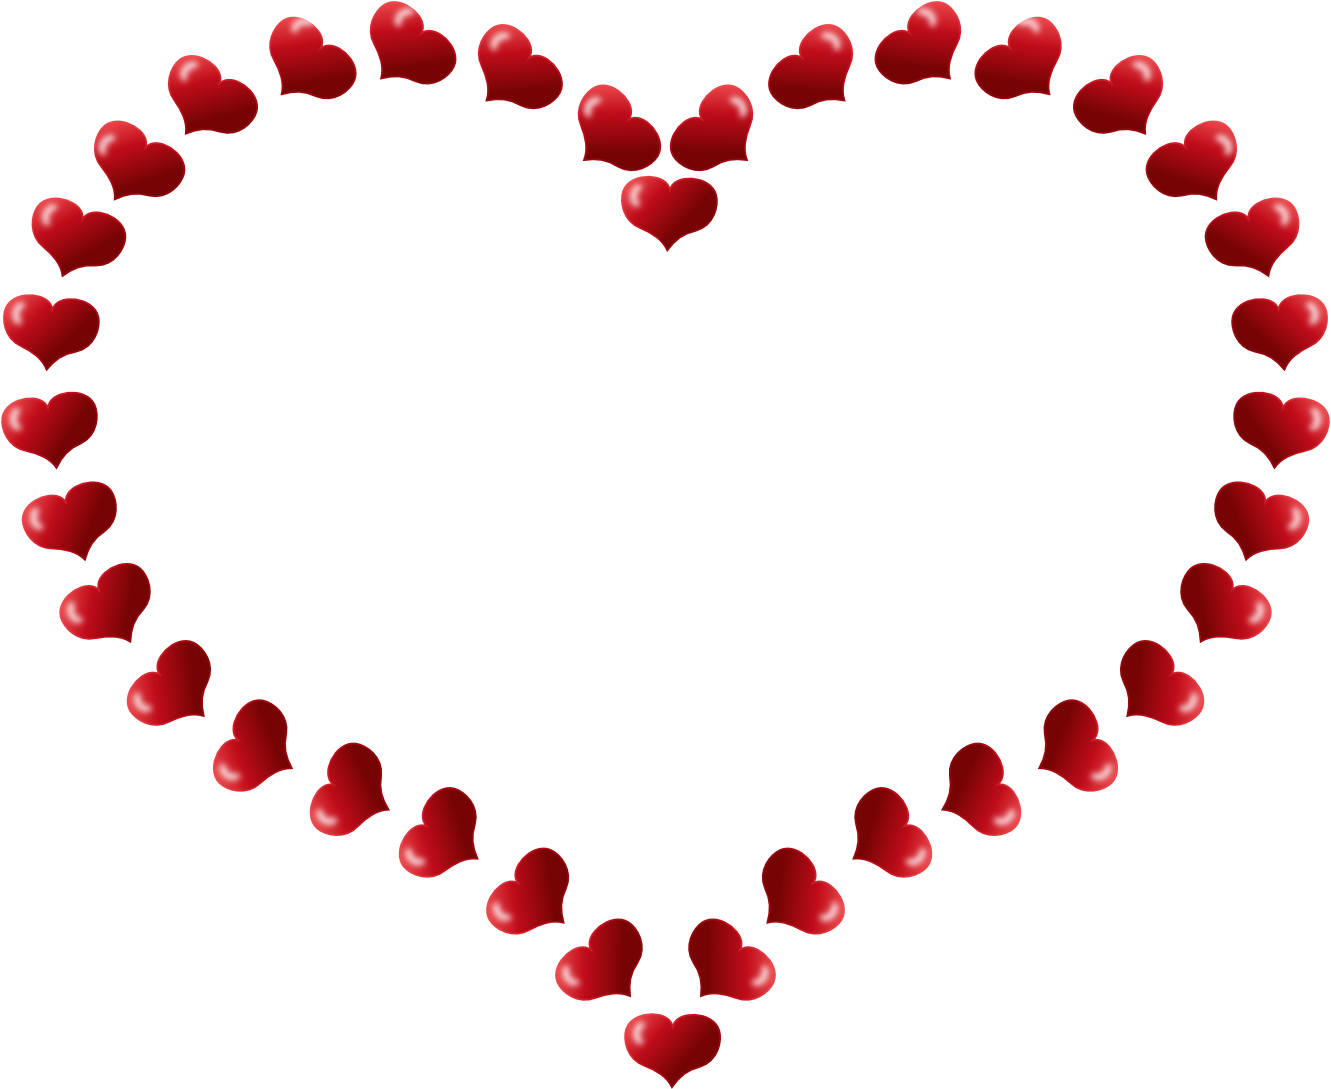 Png Hd Hearts And Flowers - Mothers Day Red Heart Shaped Border With Little Hearts Flowers, Transparent background PNG HD thumbnail